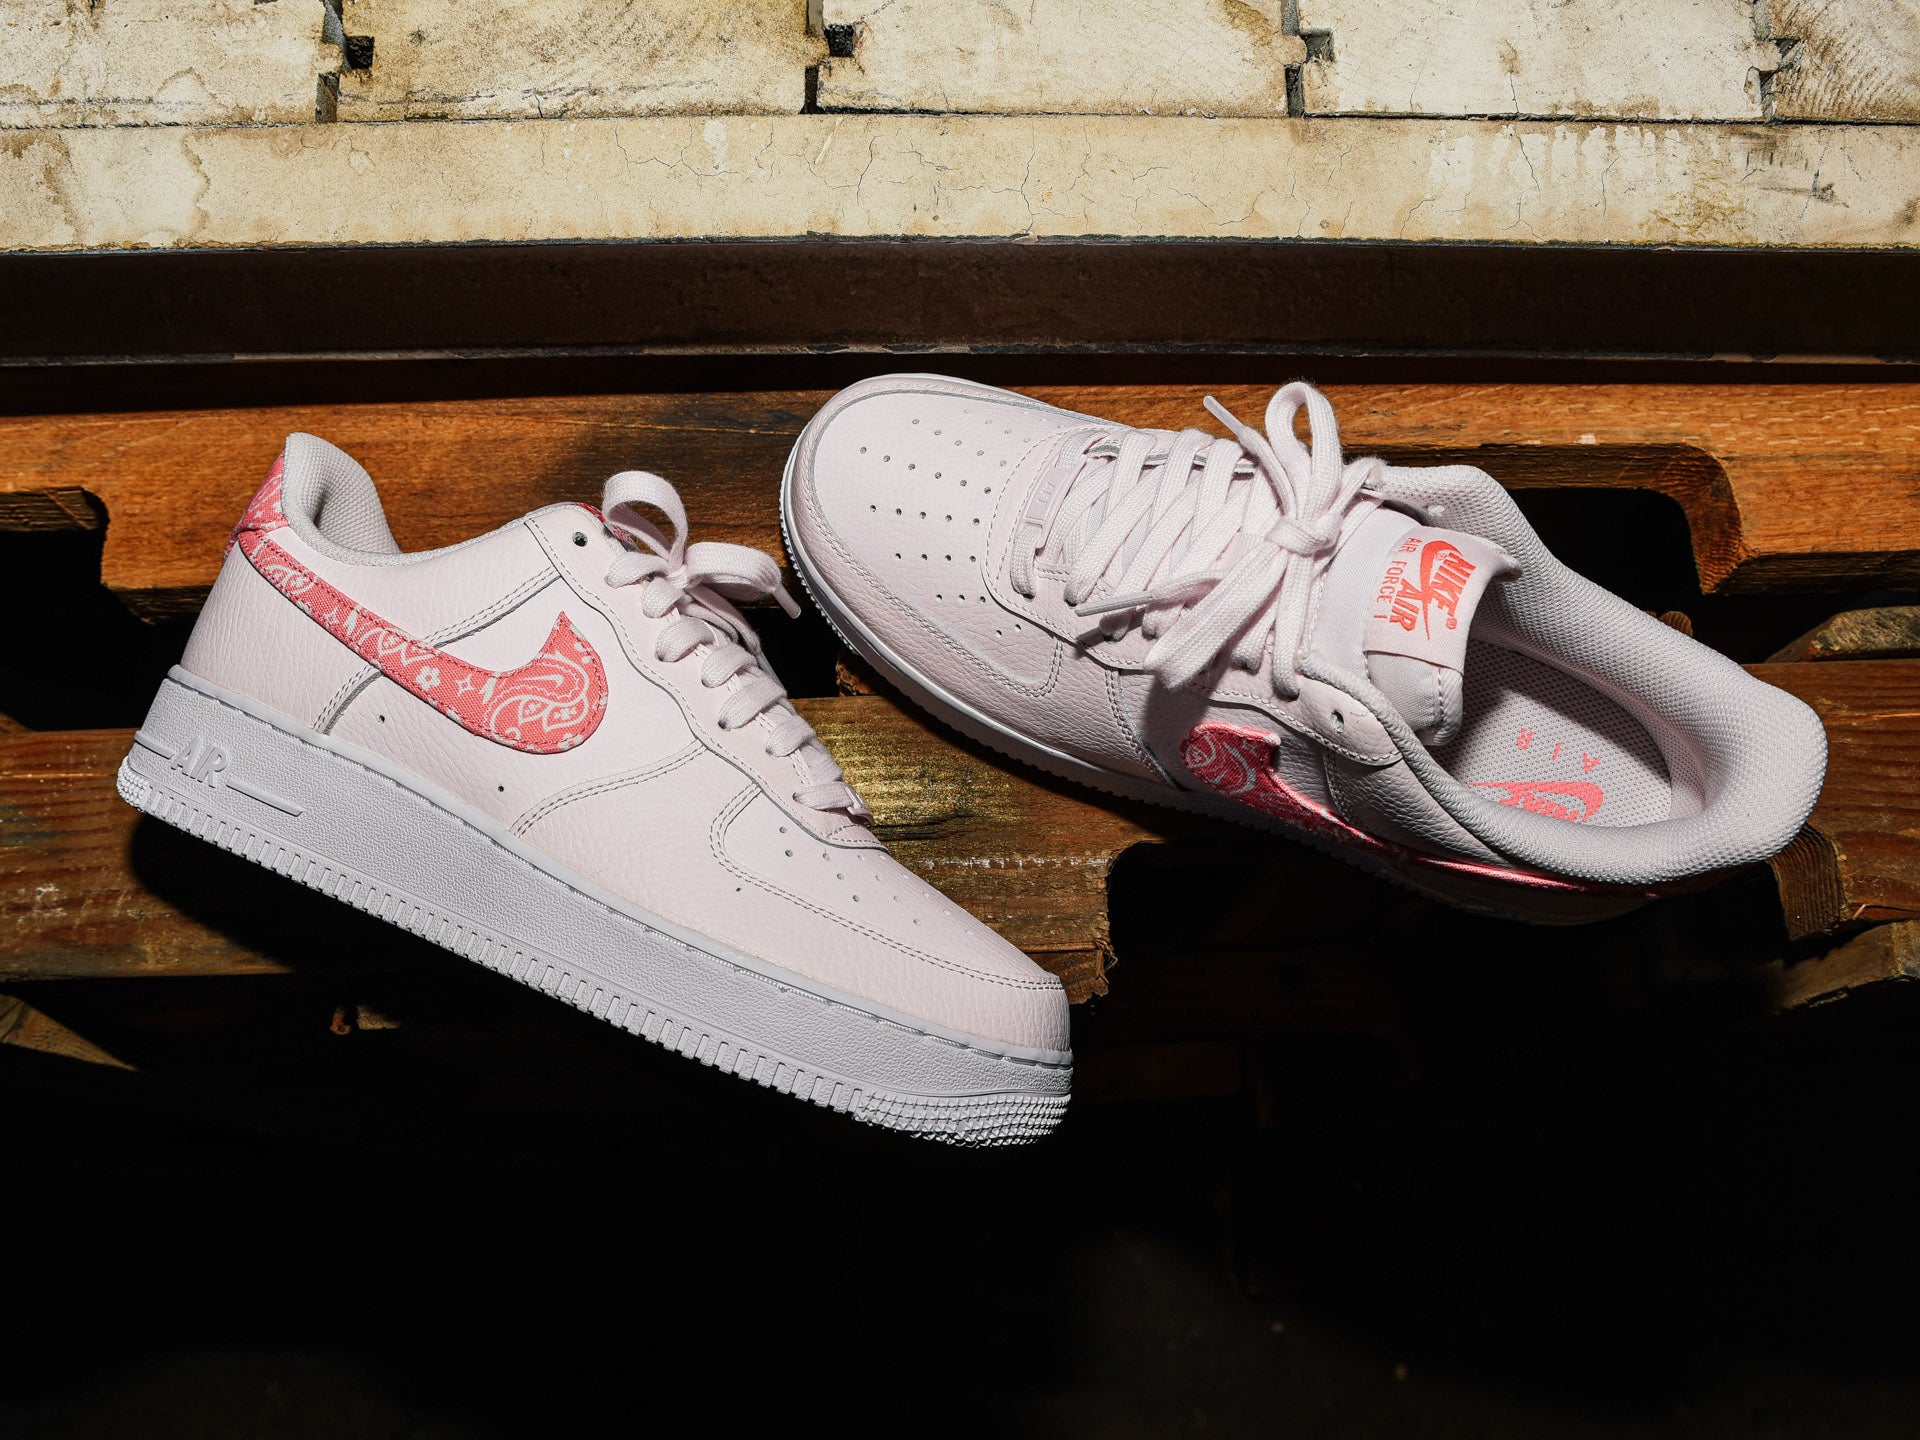 Nike Air Force 1 '07 Pearl Pink/coral Chalk-white Fd1448-664 Women's